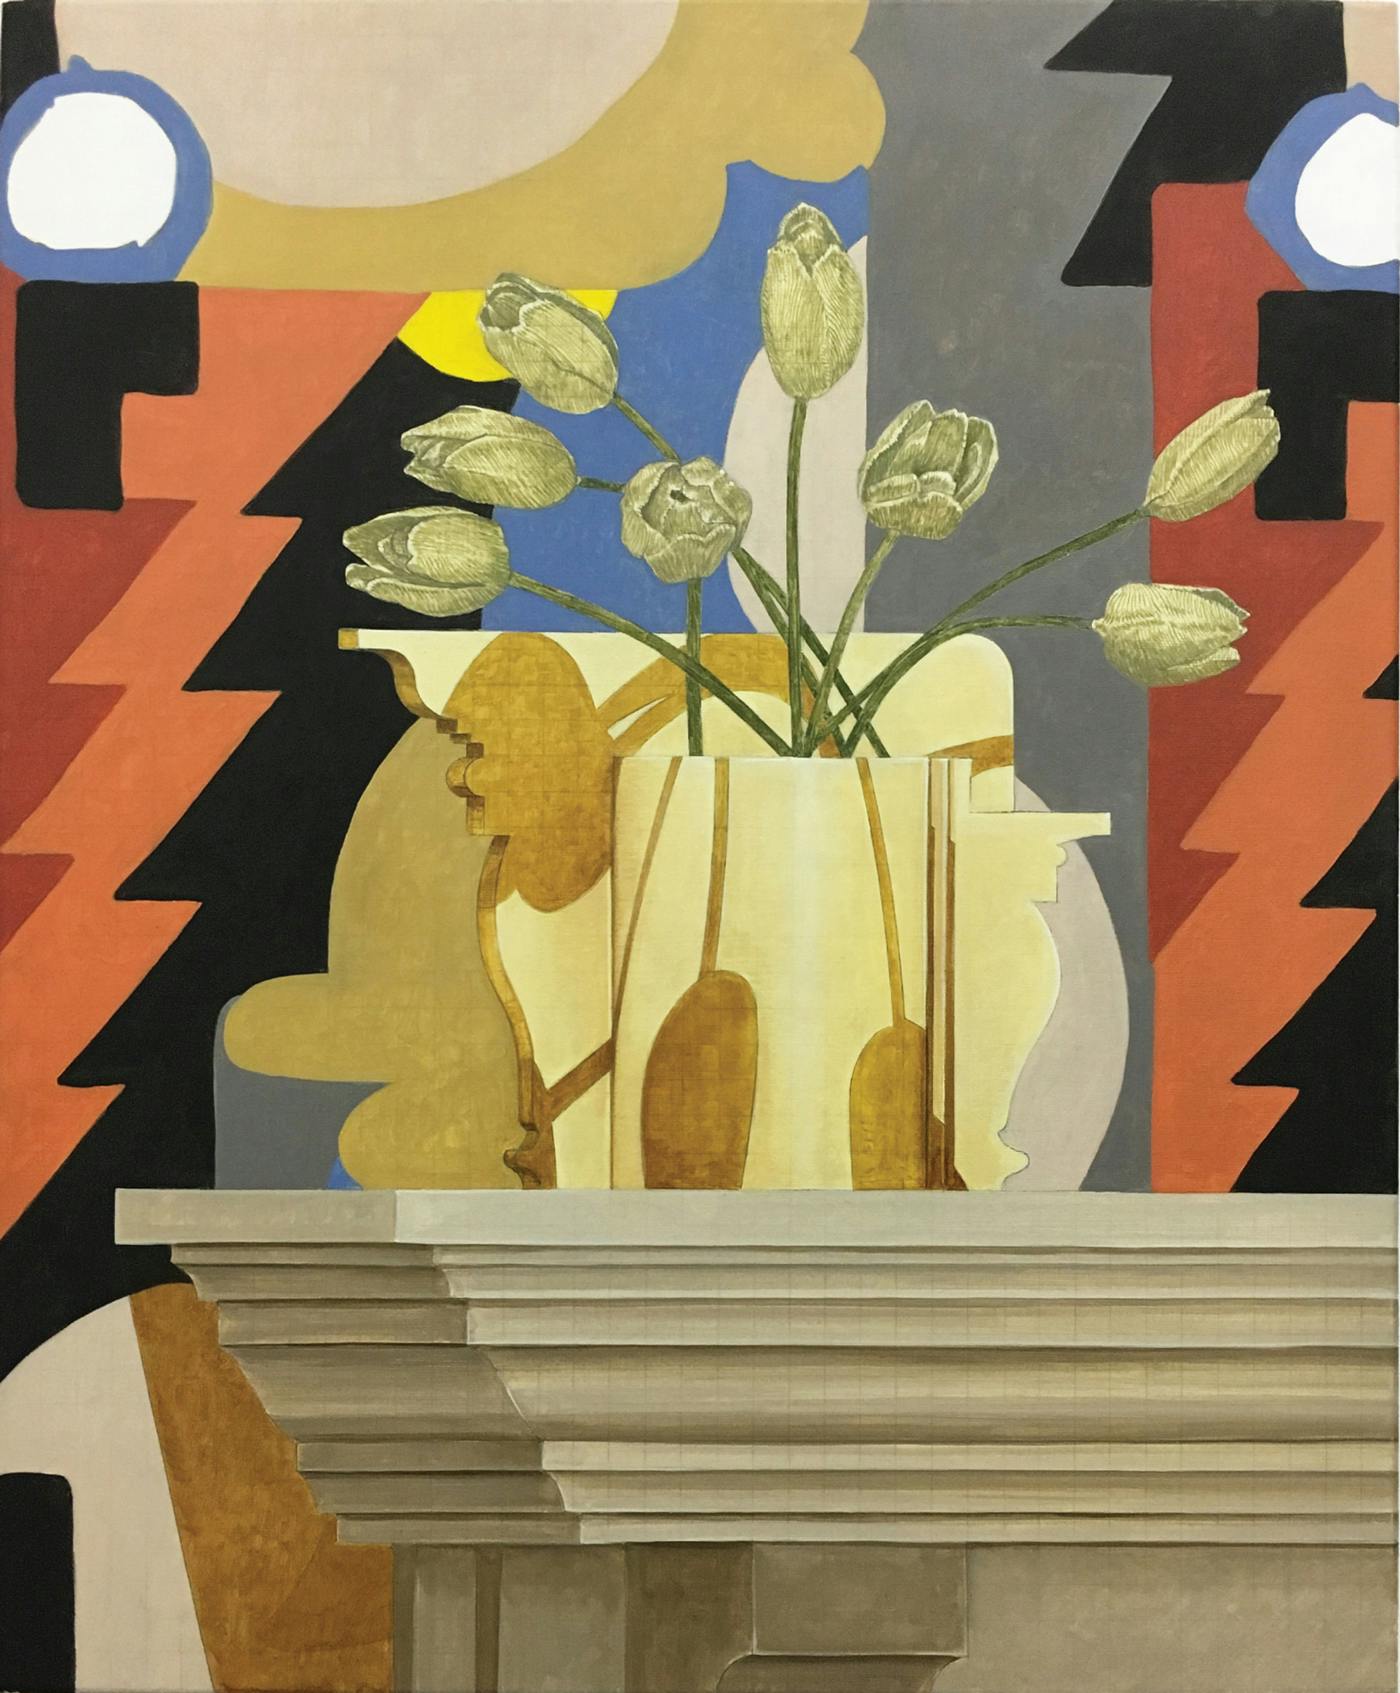 A detail of Alex Morrison’s painting. Eight white tulips in vase foreground abstract images. 